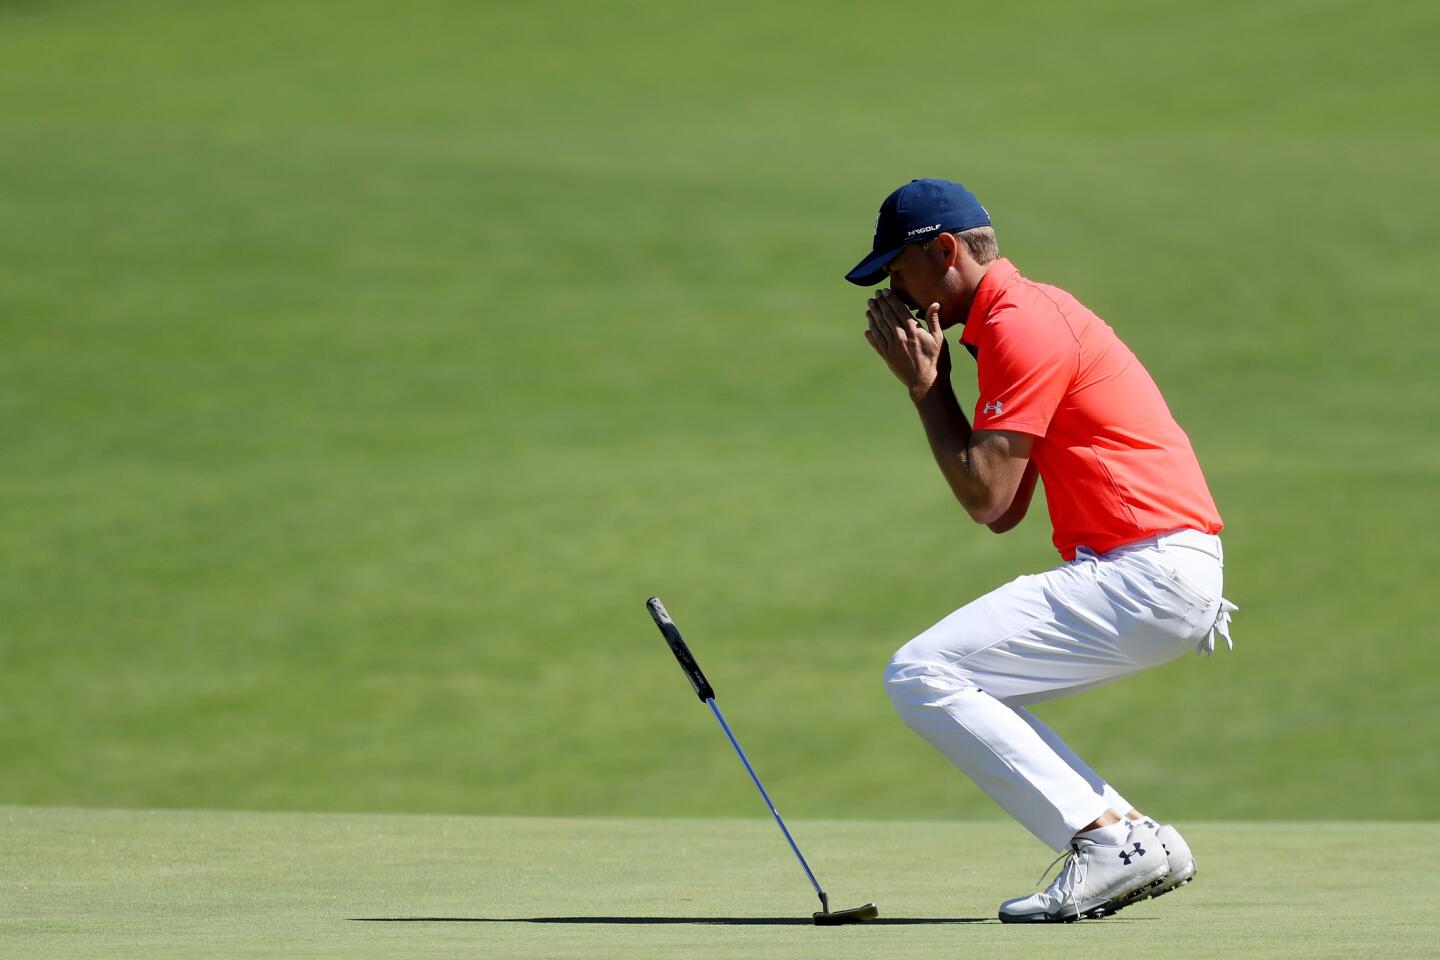 Jordan Spieth reacts to a missed putt on the 16th green during the first round of the 2018 U.S. Open at Shinnecock Hills Golf Club in Southampton, N.Y.